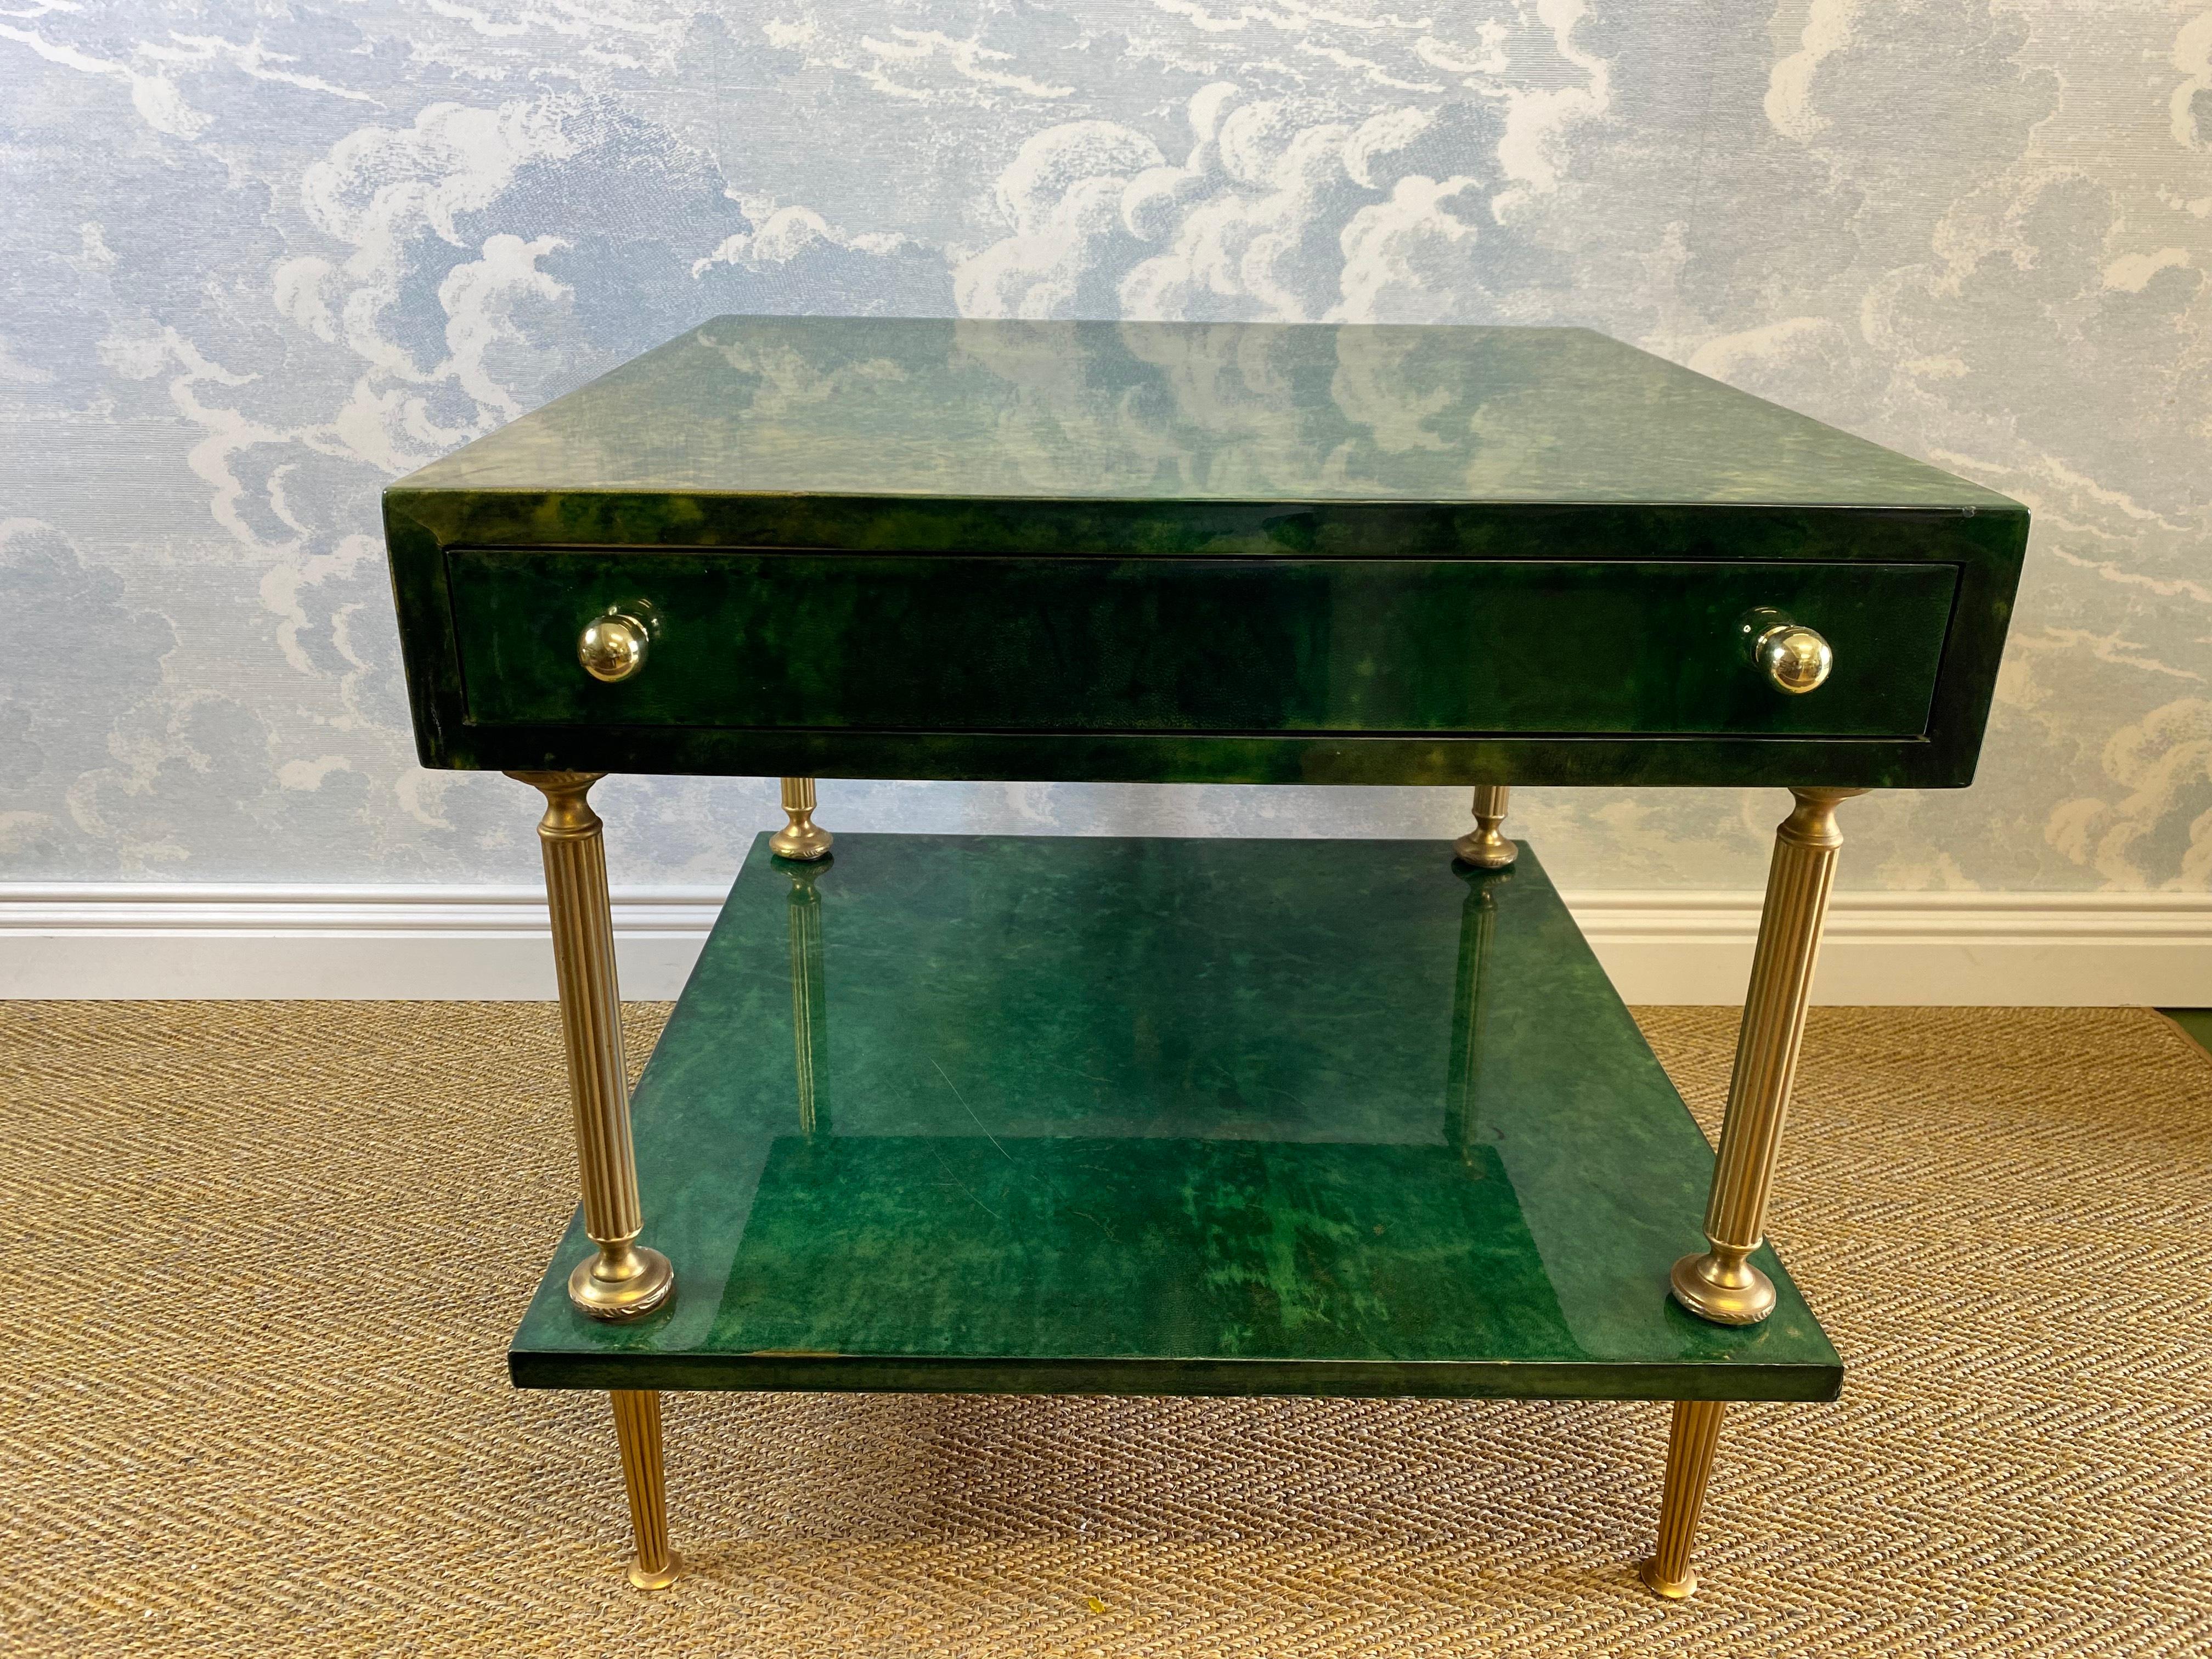 This original ALDO TURA coffee table or side table also makes a great nightstand due to its almost cube sized dimensions. 

With its distinctive and sleek design this ALDO TURA table was designed in Milano, Italy in the 1960's and was handcrafted